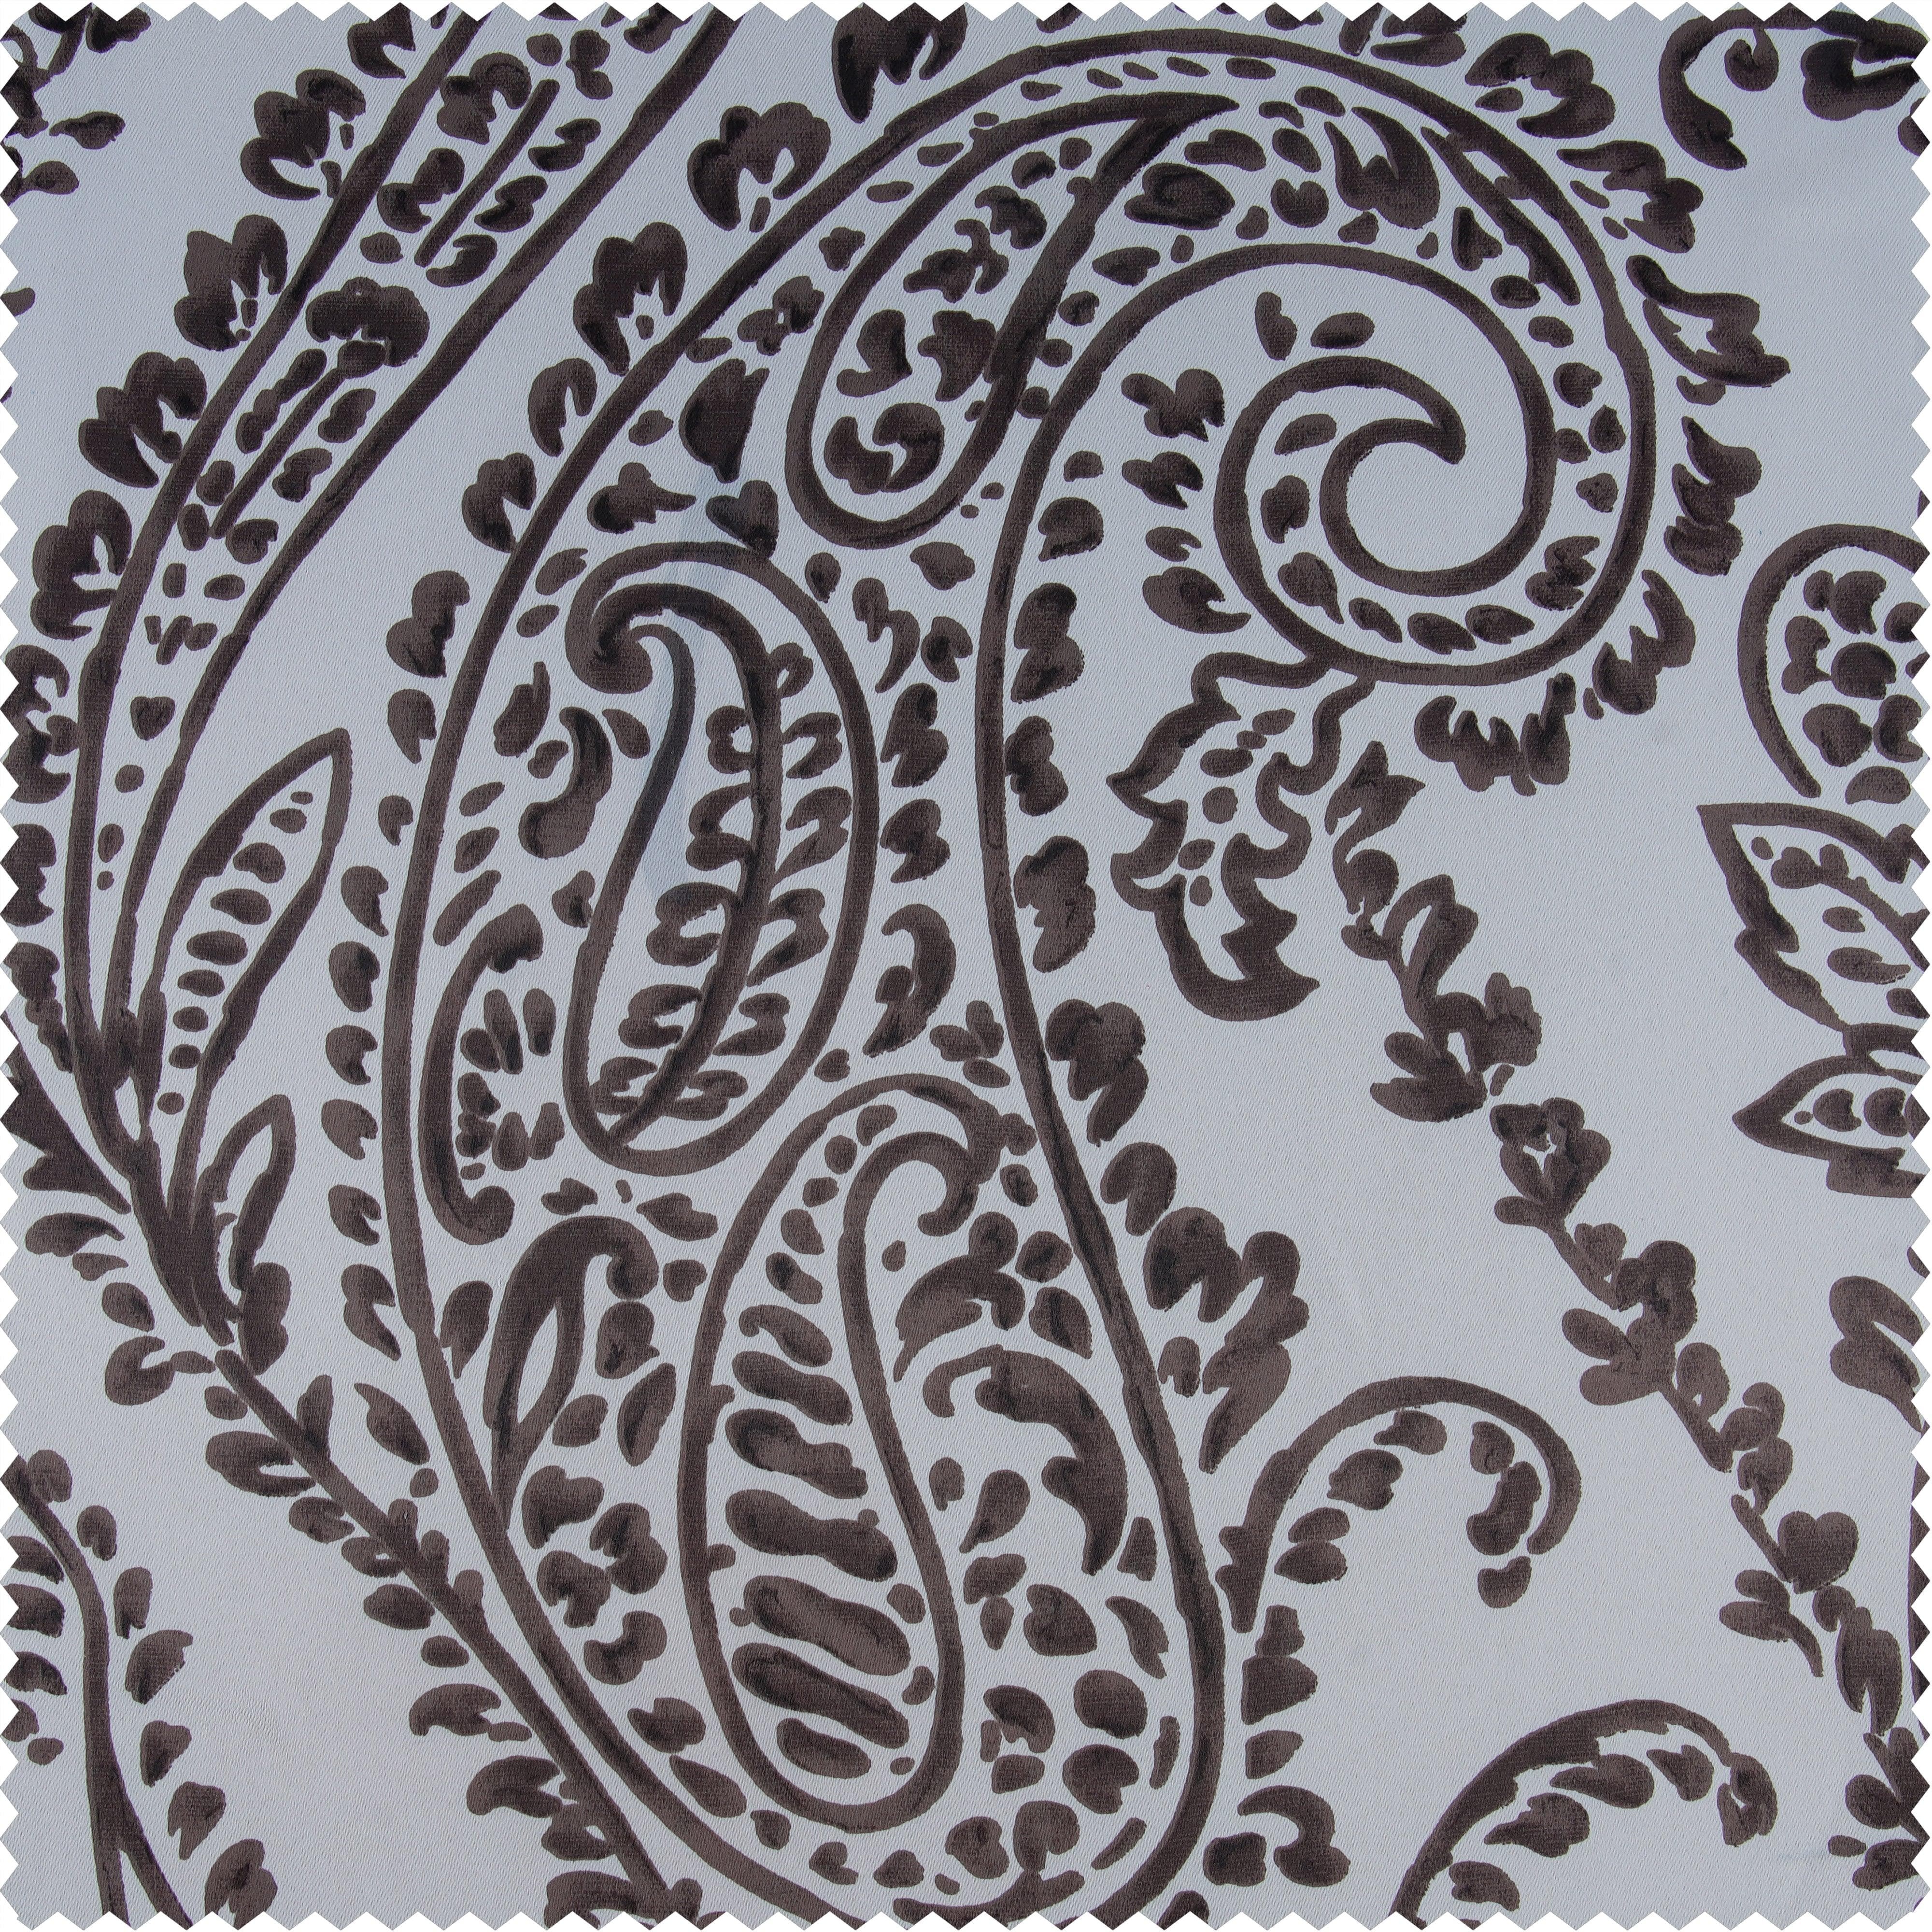 Tea Time Copper Brown Printed Polyester Swatch